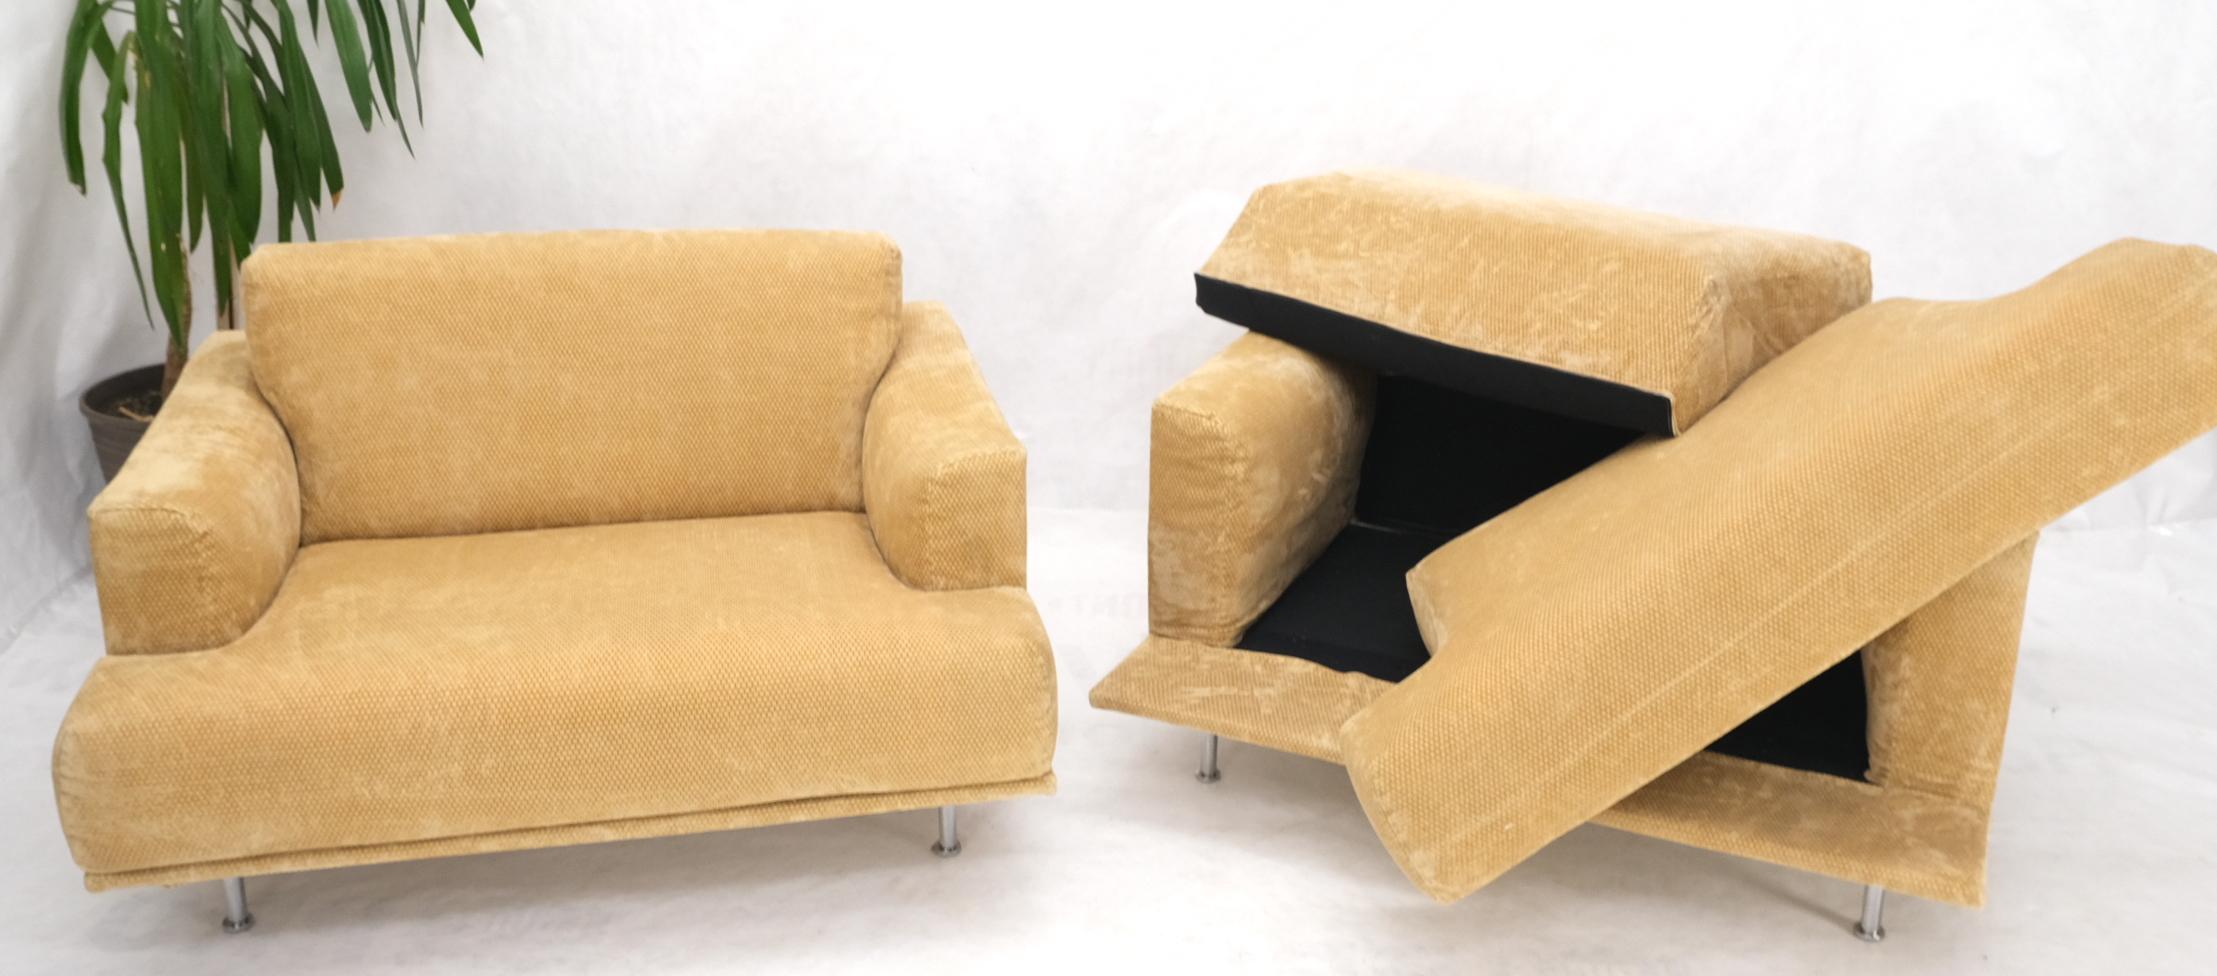 Pair of Wide Seat Almost Sattee Width Lounge Chairs by Cassina For Sale 4